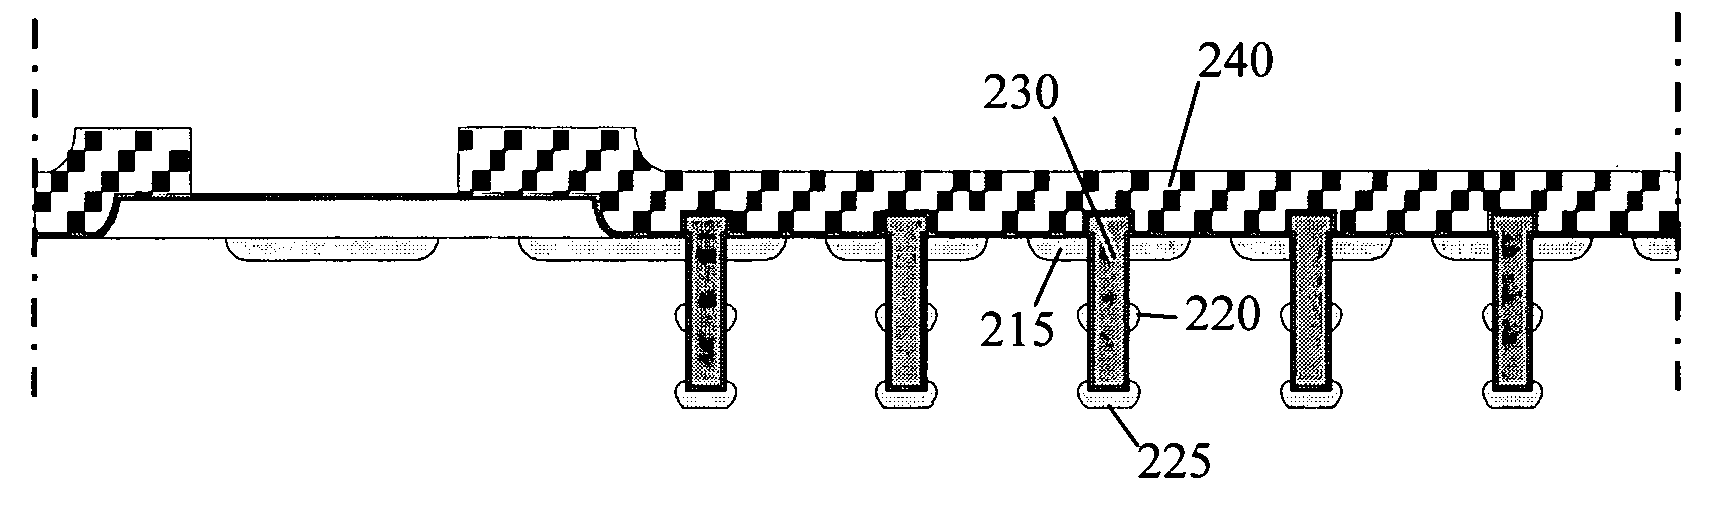 Trench junction barrier controlled Schottky device with top and bottom doped regions for enhancing forward current in a vertical direction